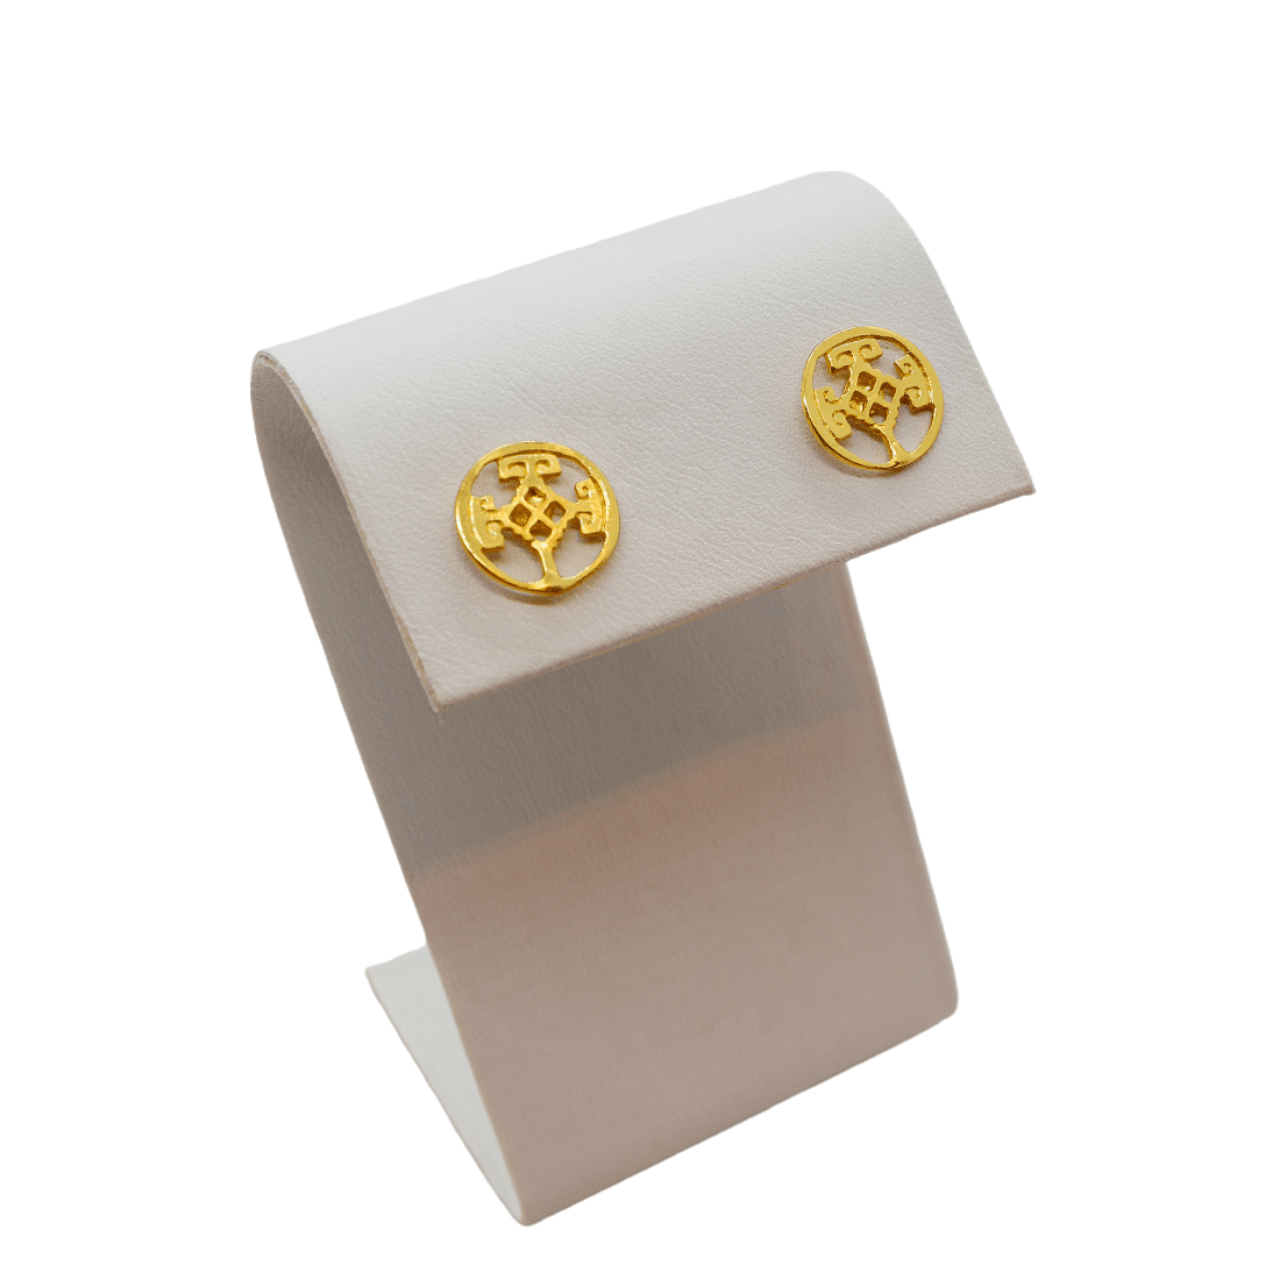 Handcrafted 24K gold plated studs earrings, inspired by ancient Pre-Colombian motifs. Ideal for daily wear or gifting on special occasions like Mother's Day, anniversaries, or birthdays